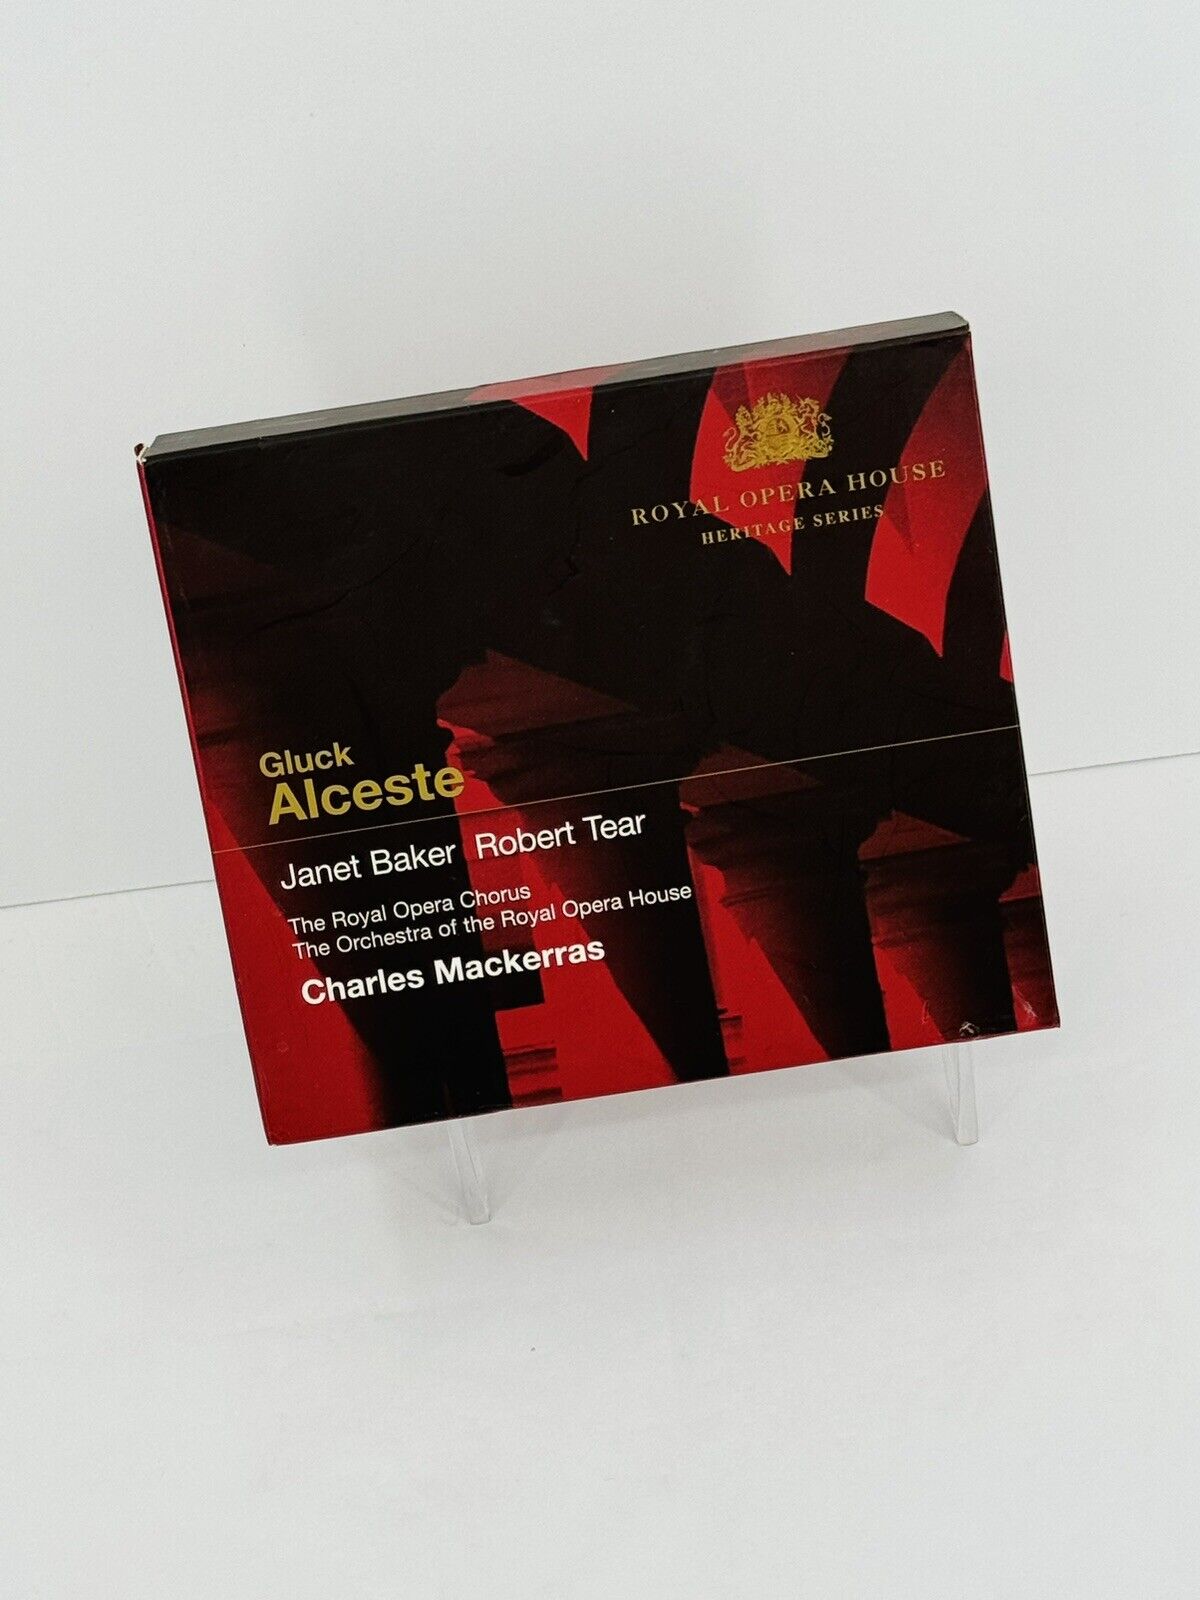 GLUCK - Alceste by The Royal Opera House Orchestra (Cd, 2008, 2 Disc BoxSet)